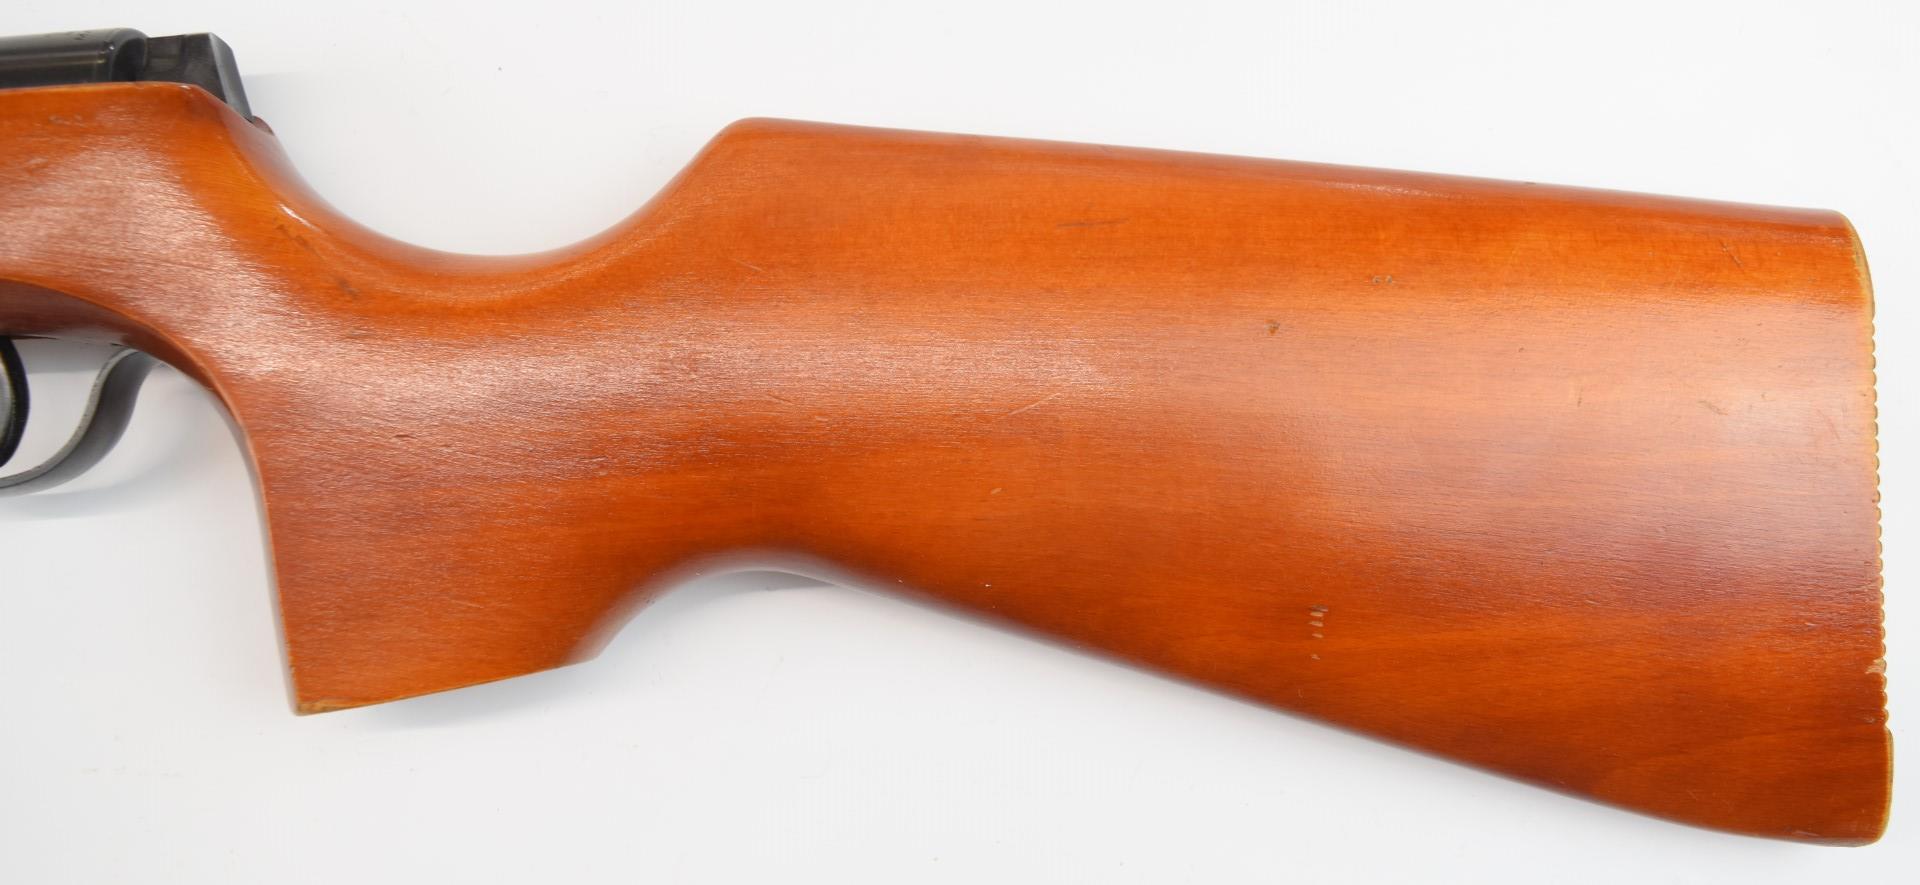 Haenel Model 310 lever-action 4.4mm calibre air rifle with semi-pistol grip, adjustable sights and - Image 14 of 19